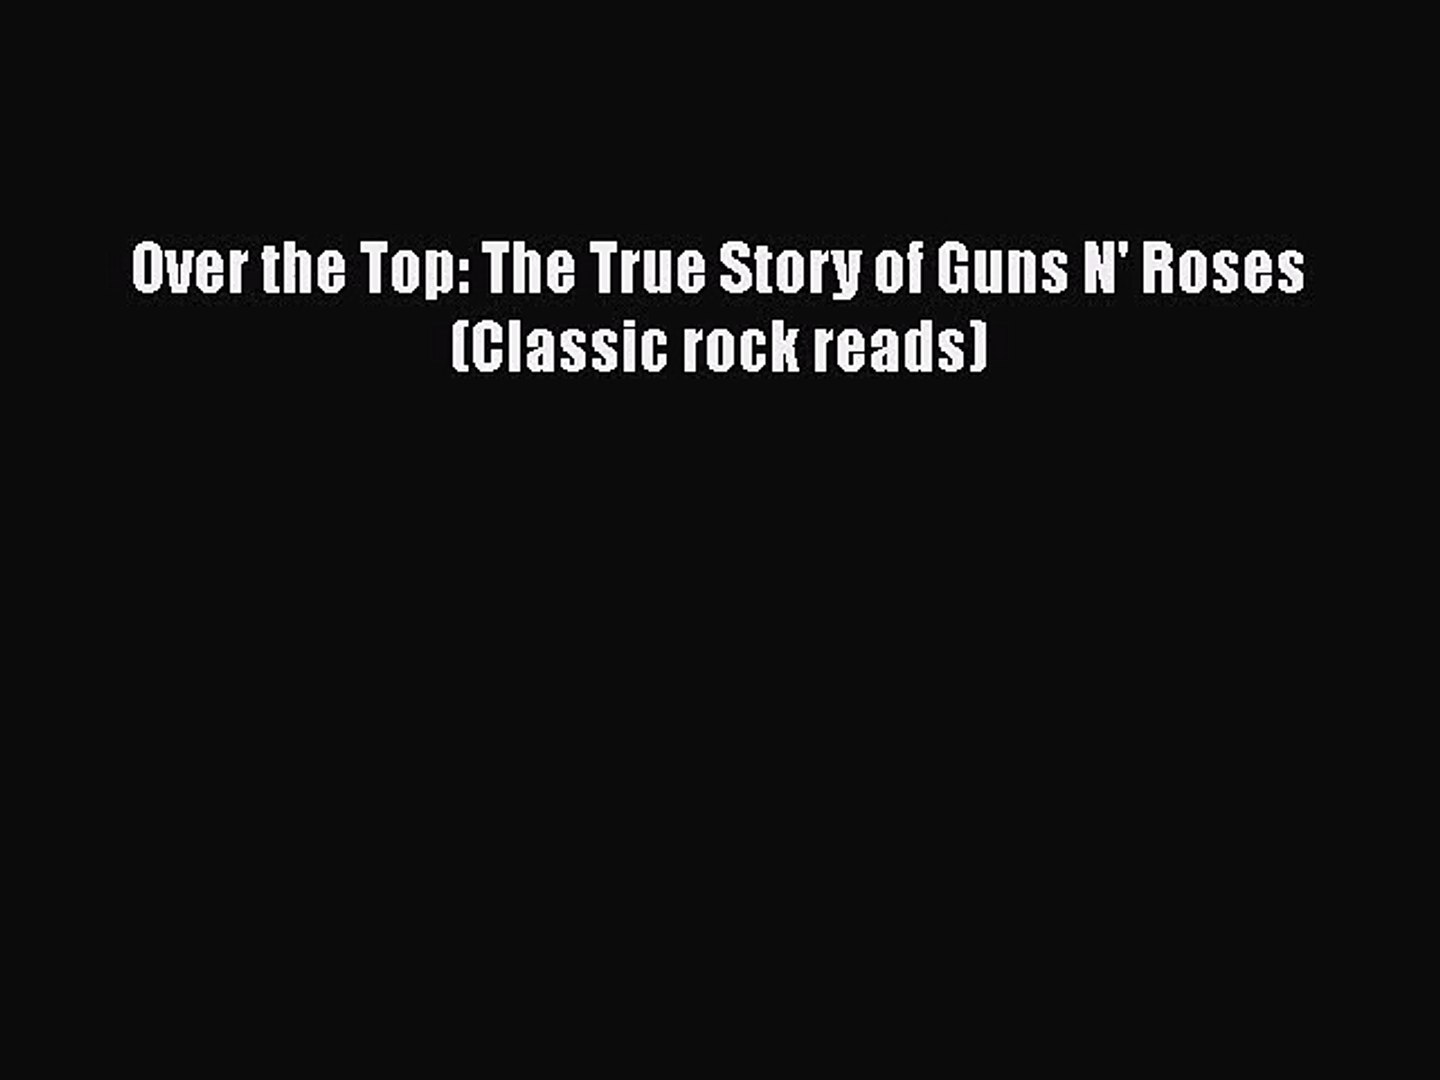 Download Over the Top: The True Story of Guns N' Roses (Classic rock reads) Ebook Online